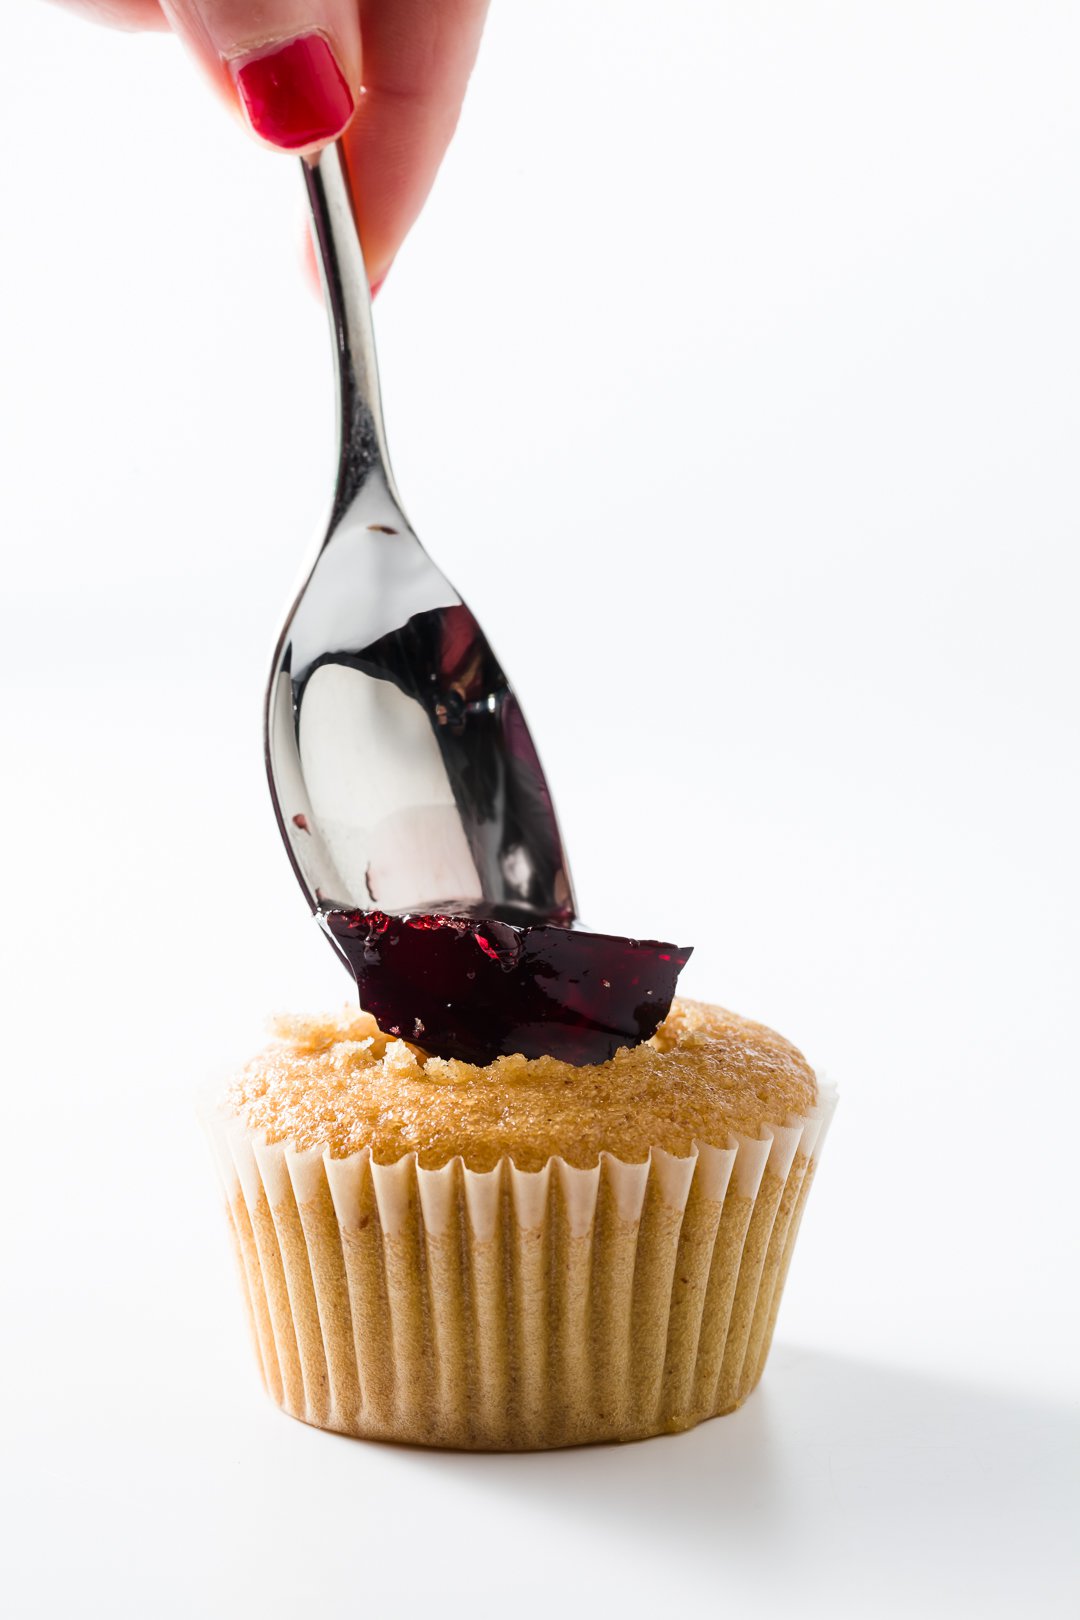 Adding jelly to a peanut butter and jelly cupcake